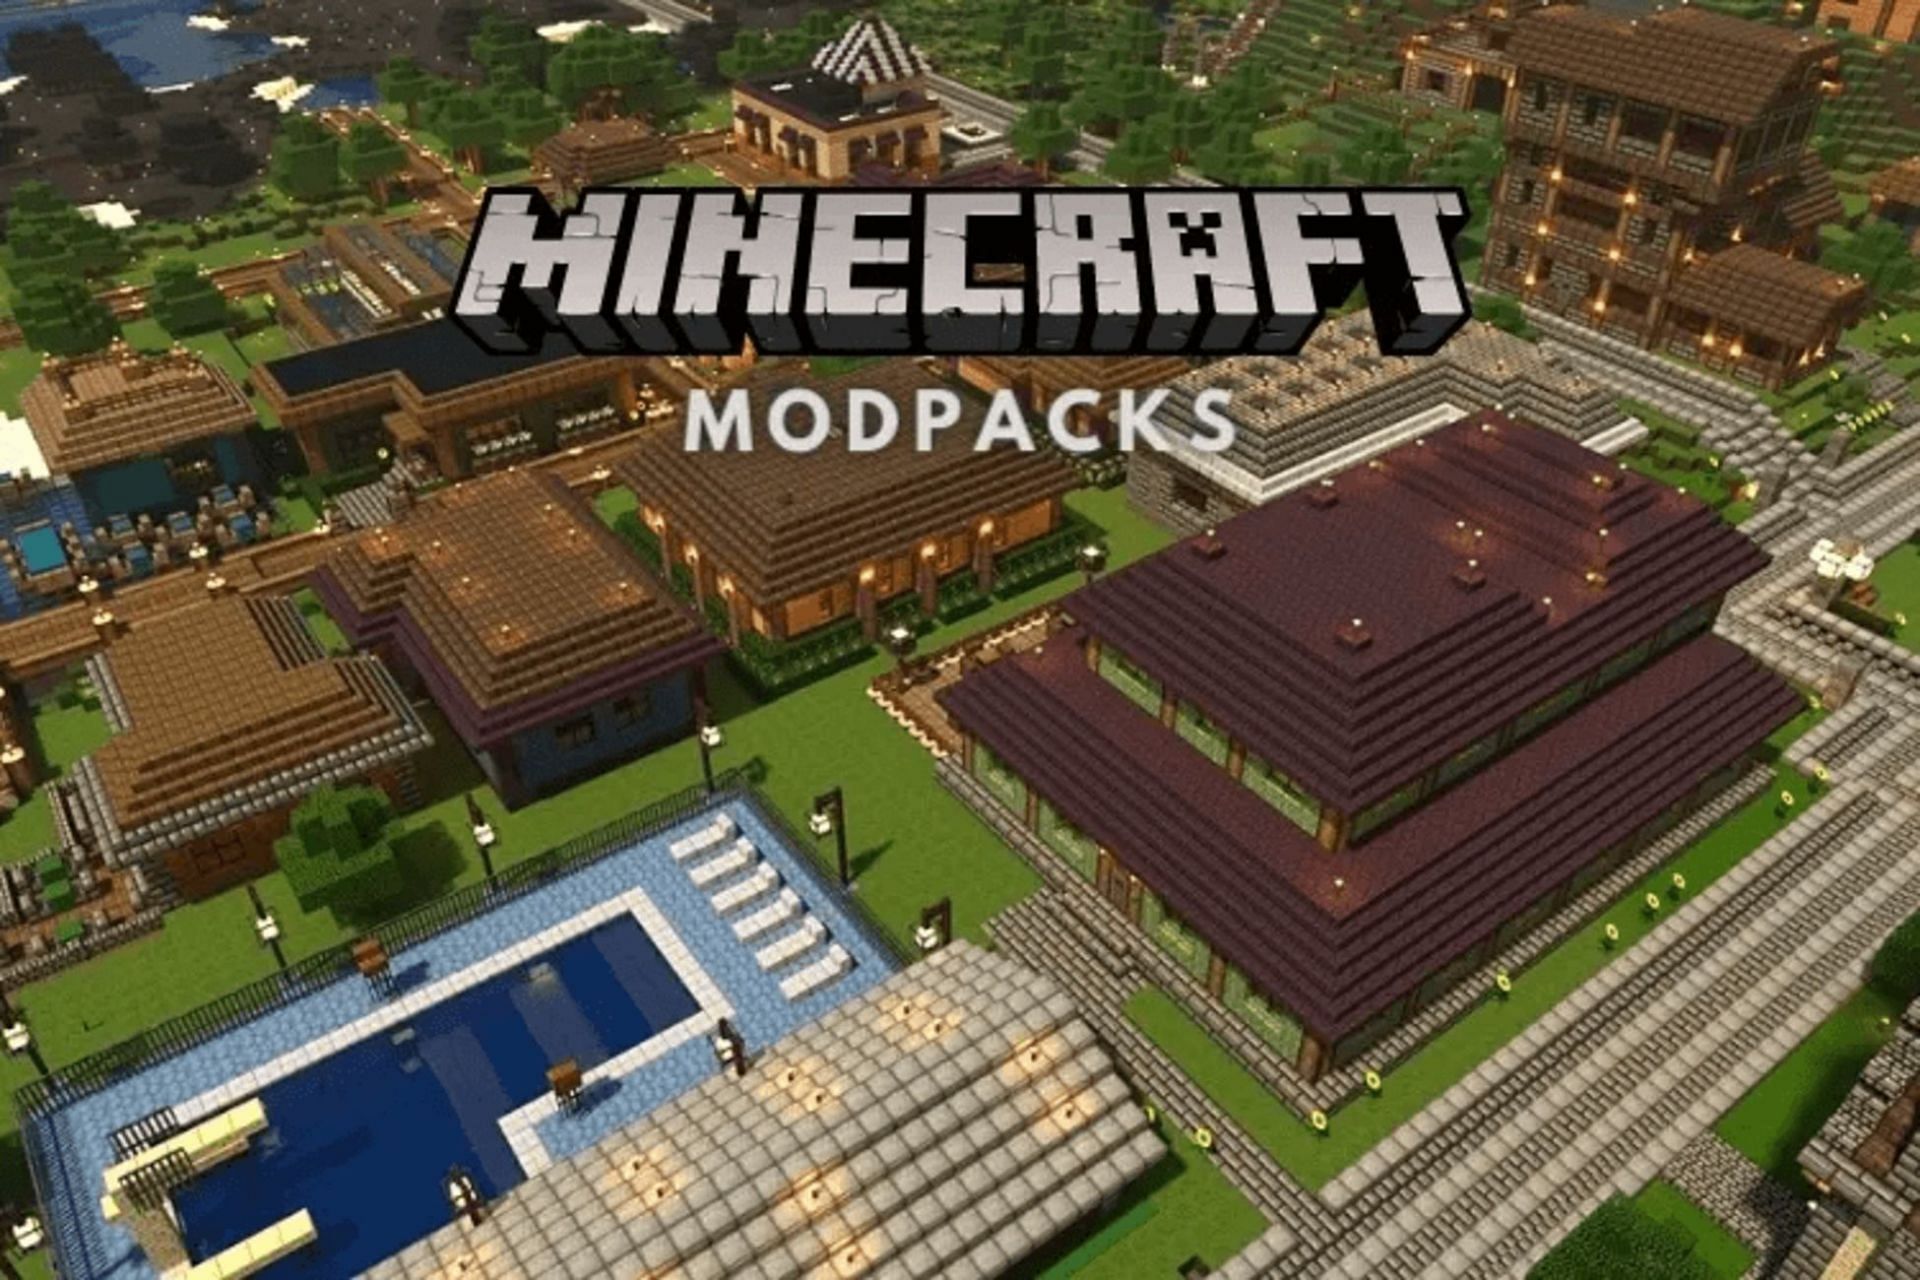 Some modpacks are still great for players who may not have impressive hardware (Image via Mojang)